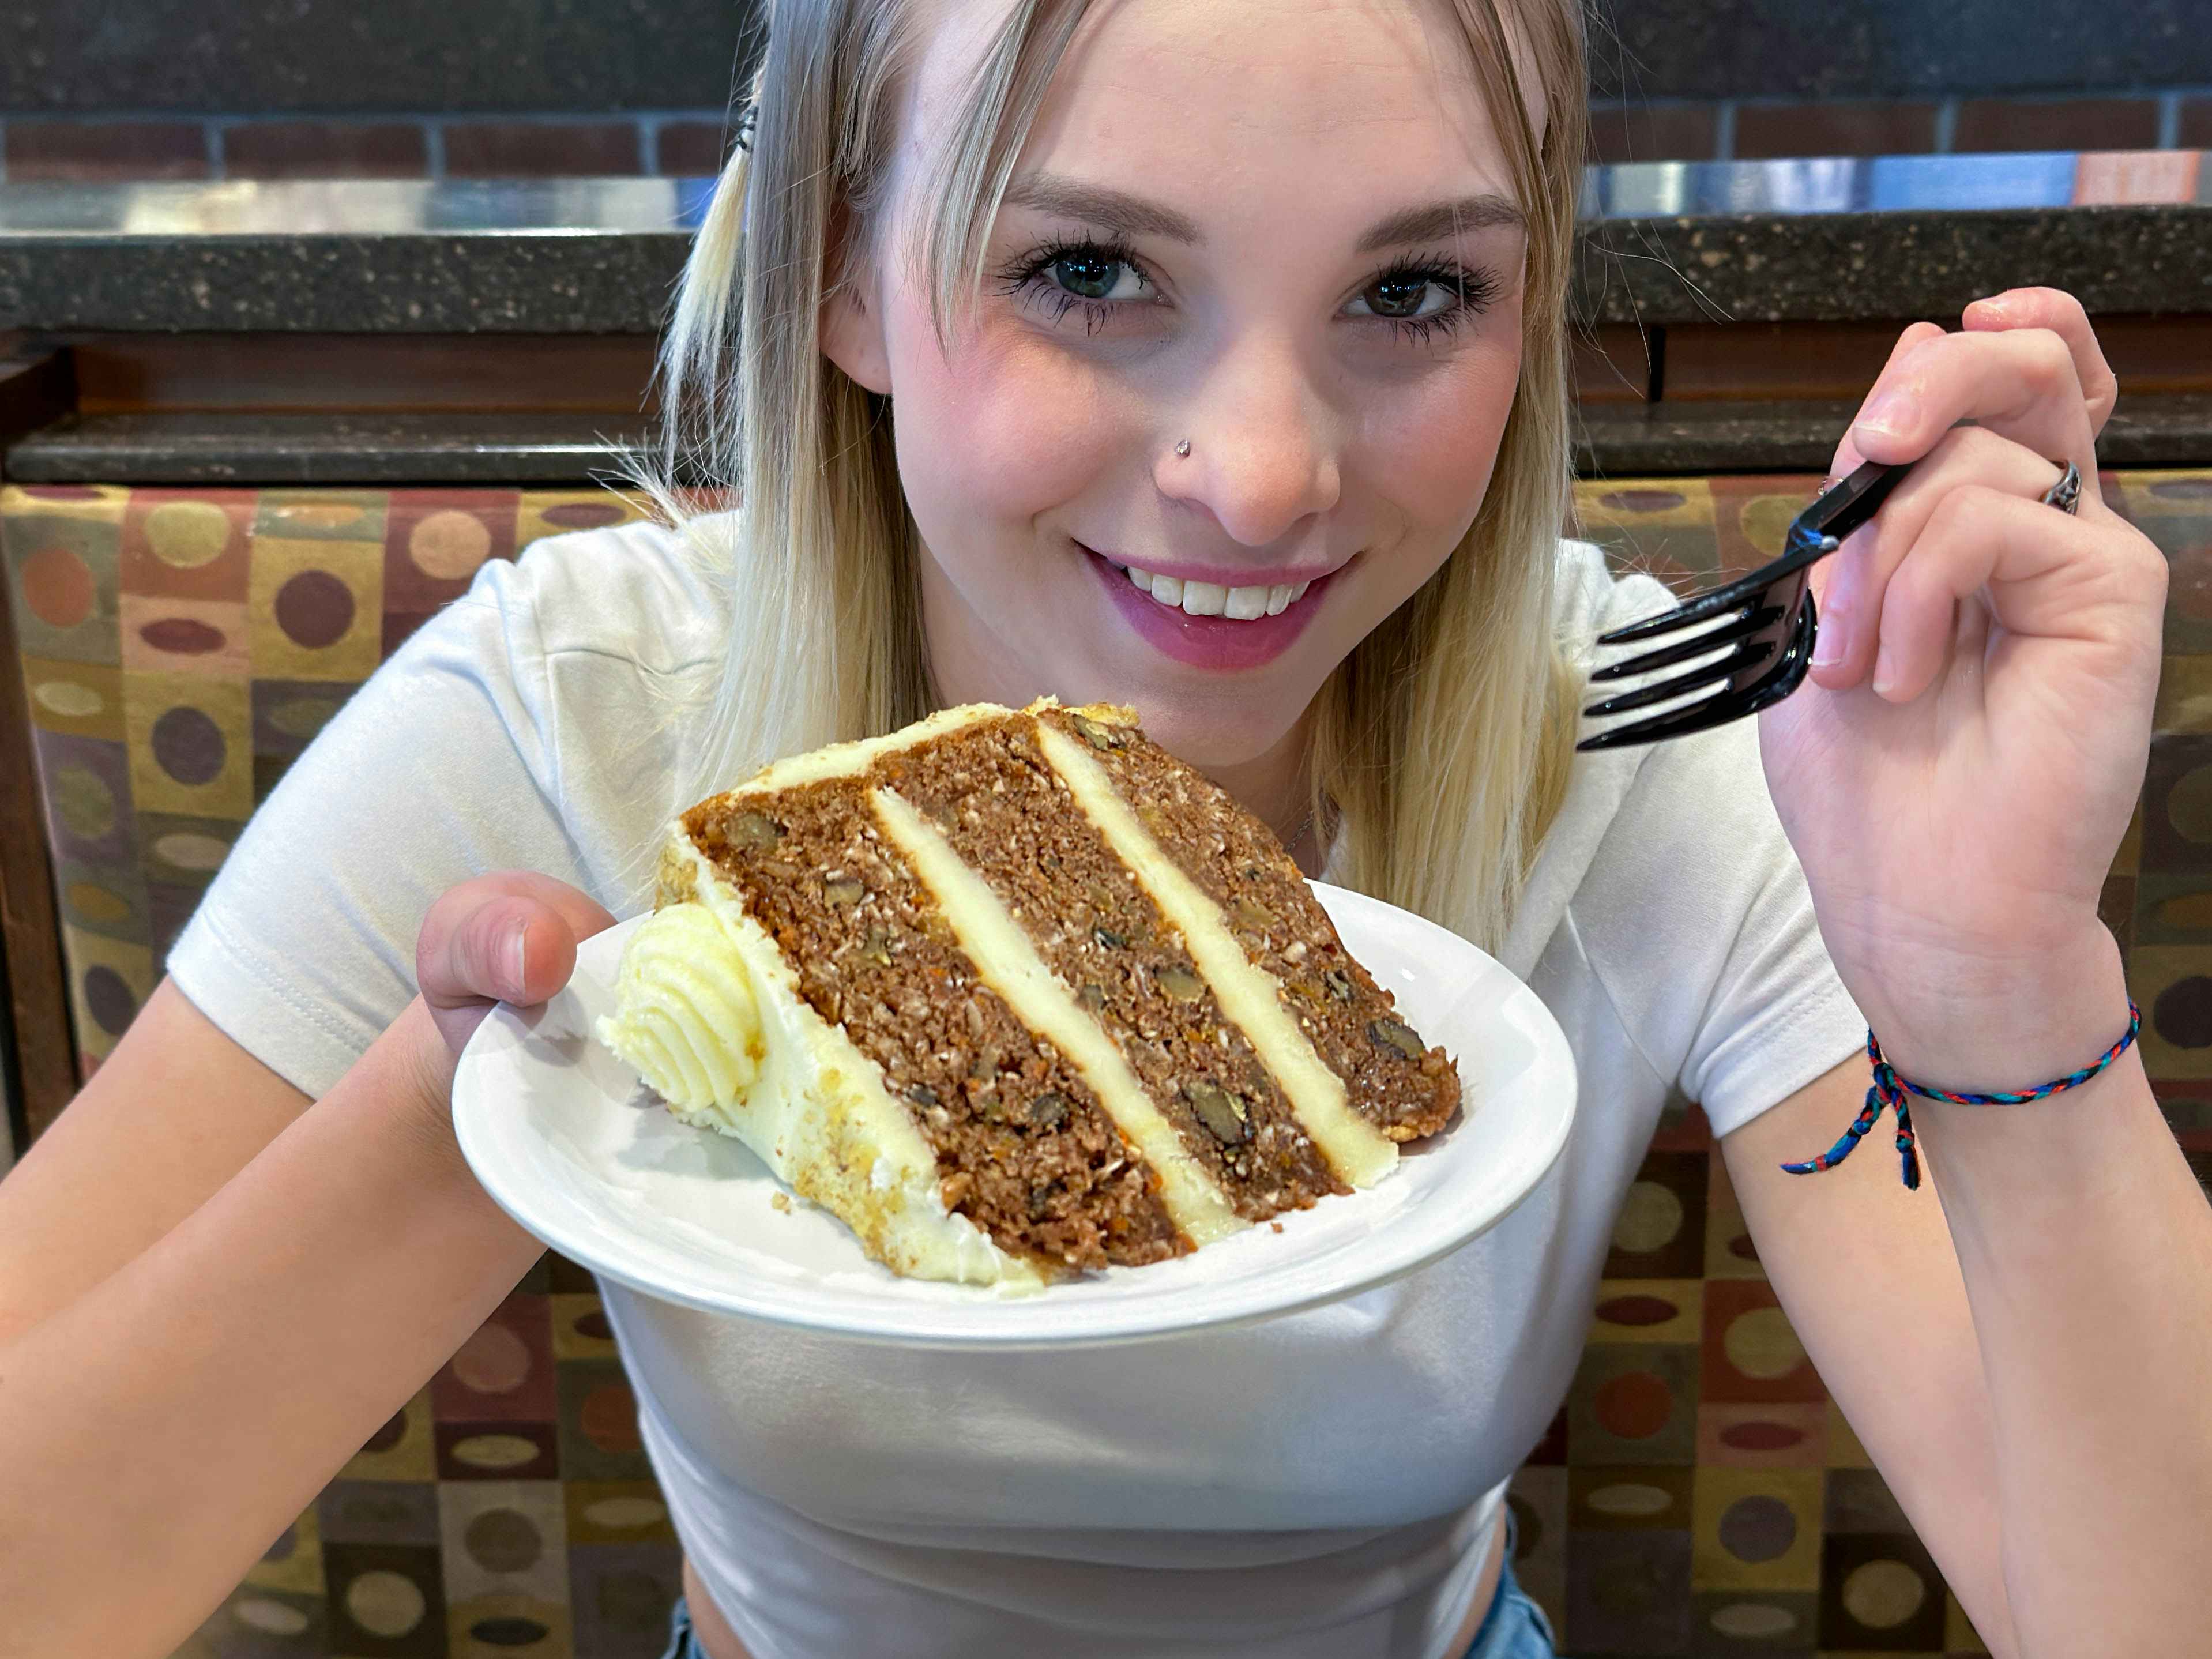  a woman holding up a piece of carrot cake and holding a fork 